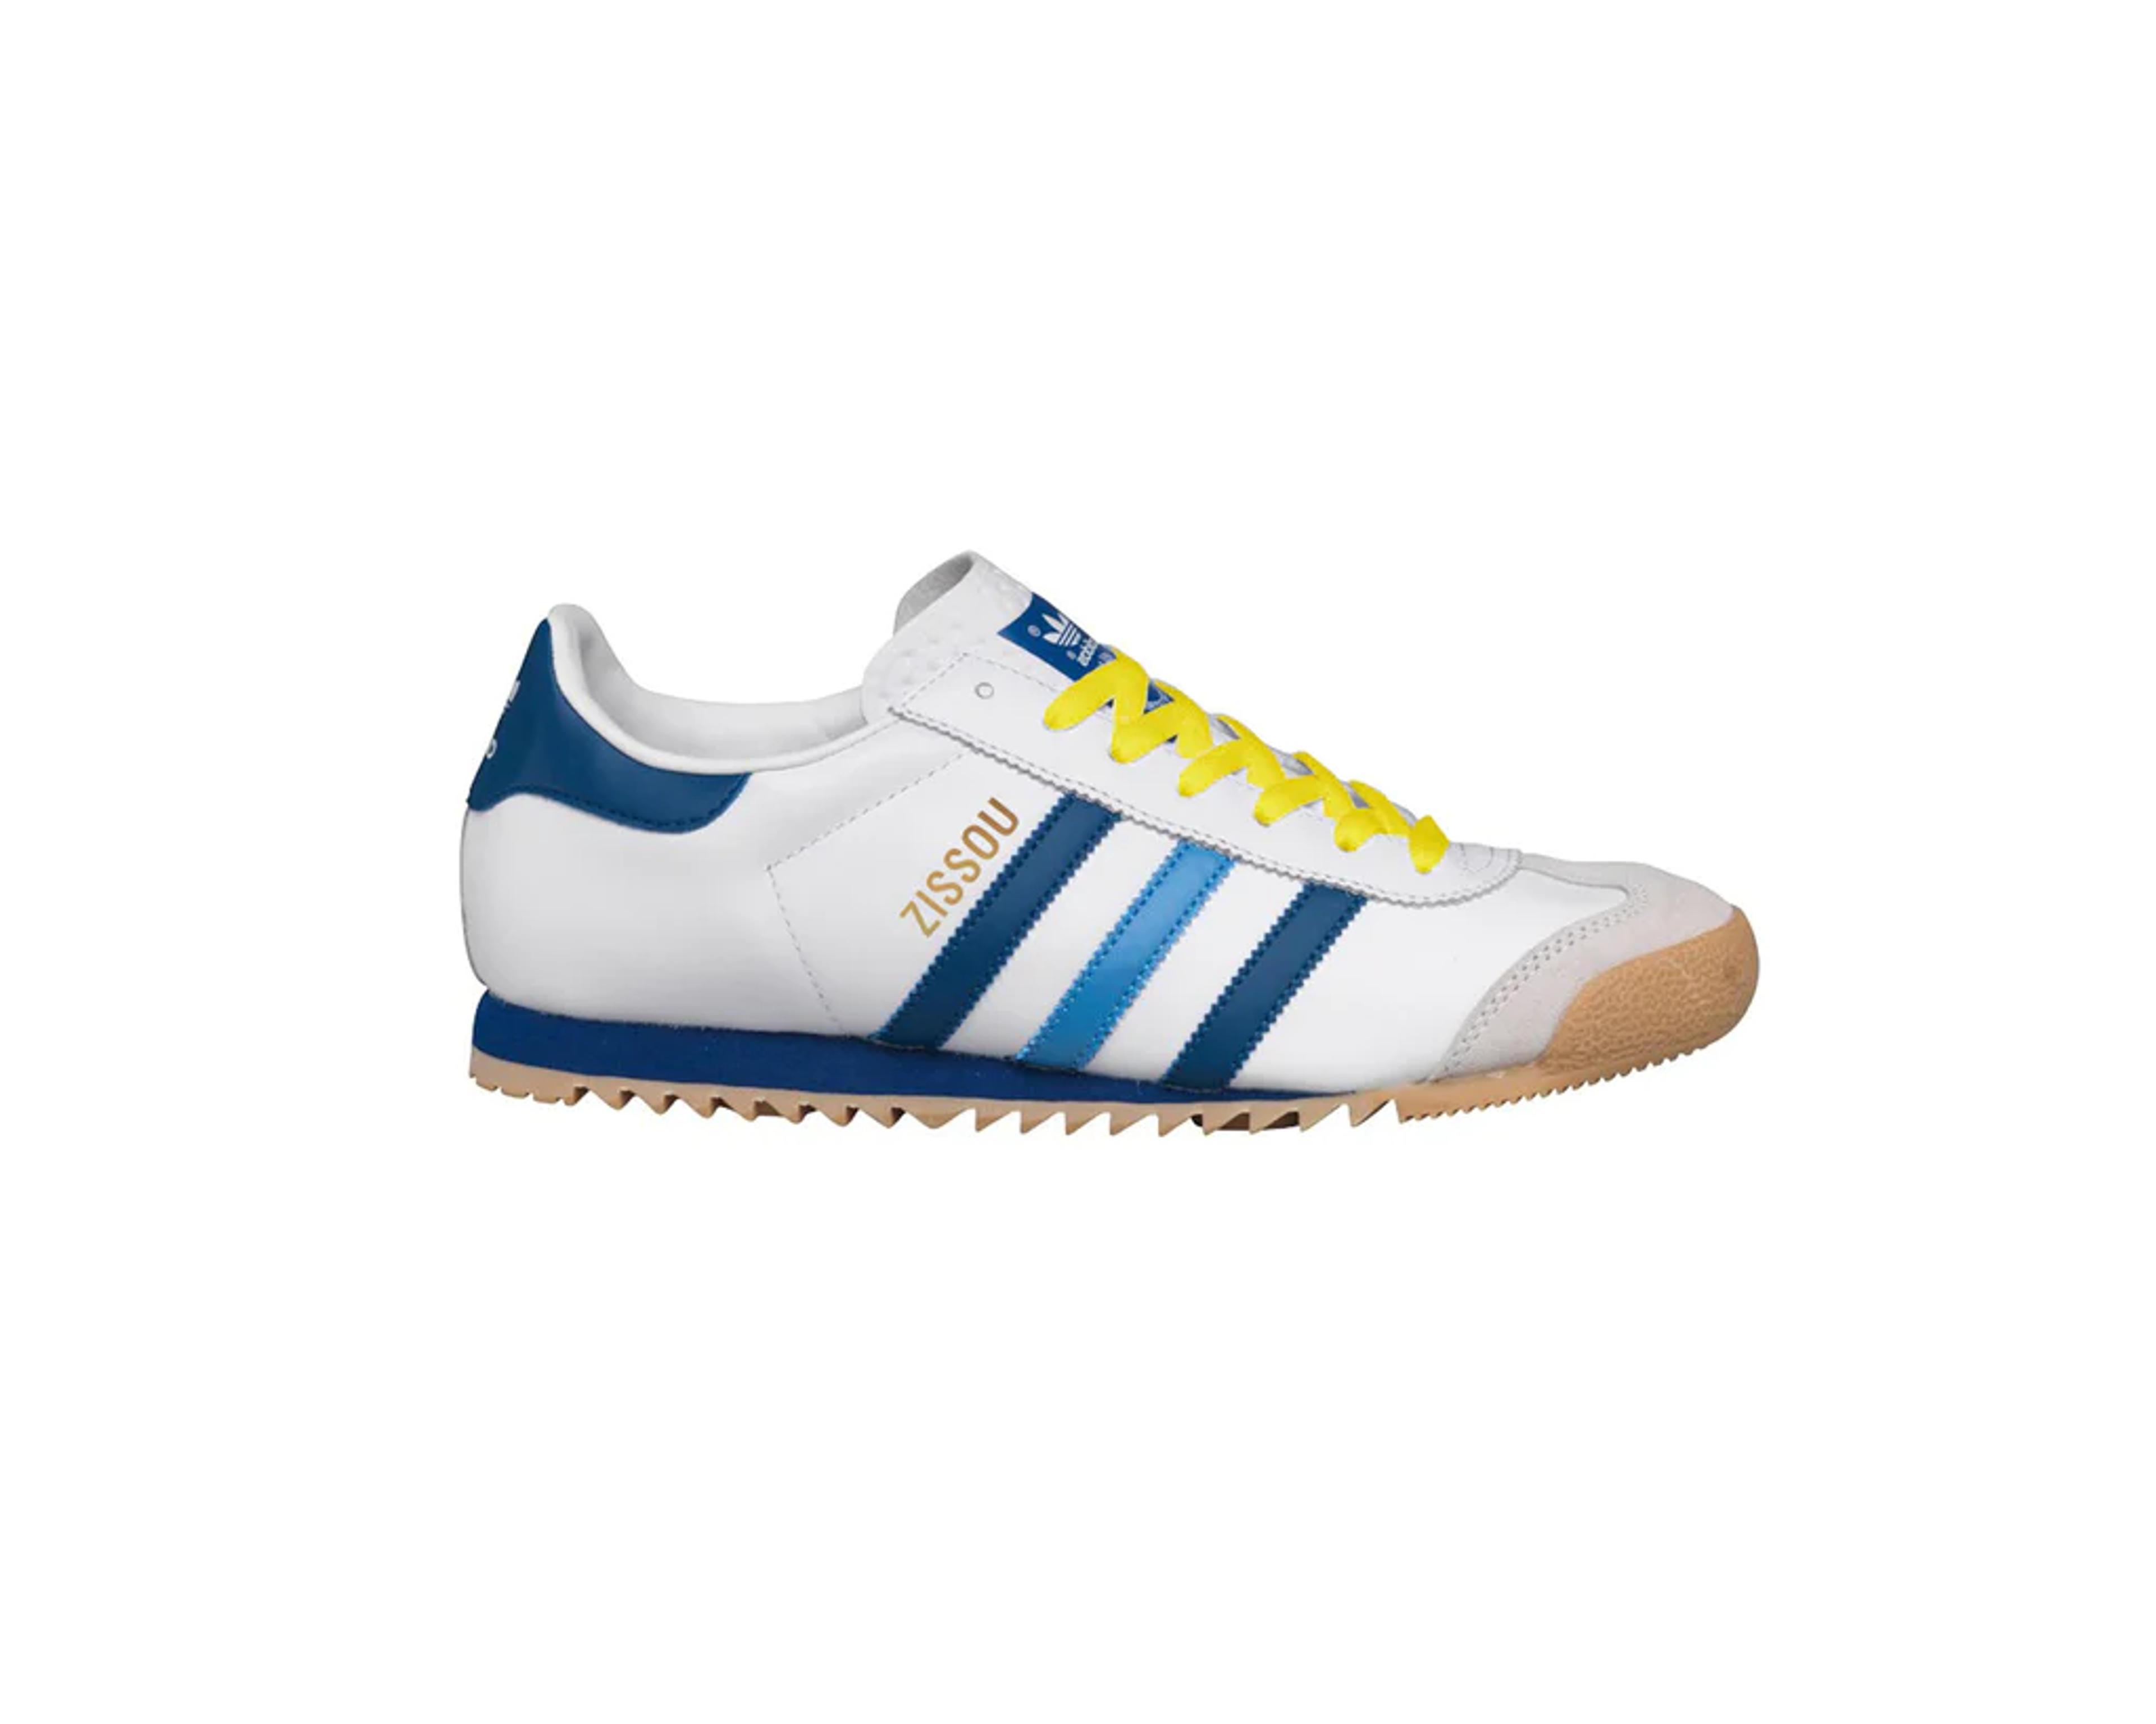 Adidas Zissou Shoes Limited Edition Life Aquatic With Steve Zissou | The Society Of The Crossed Keys